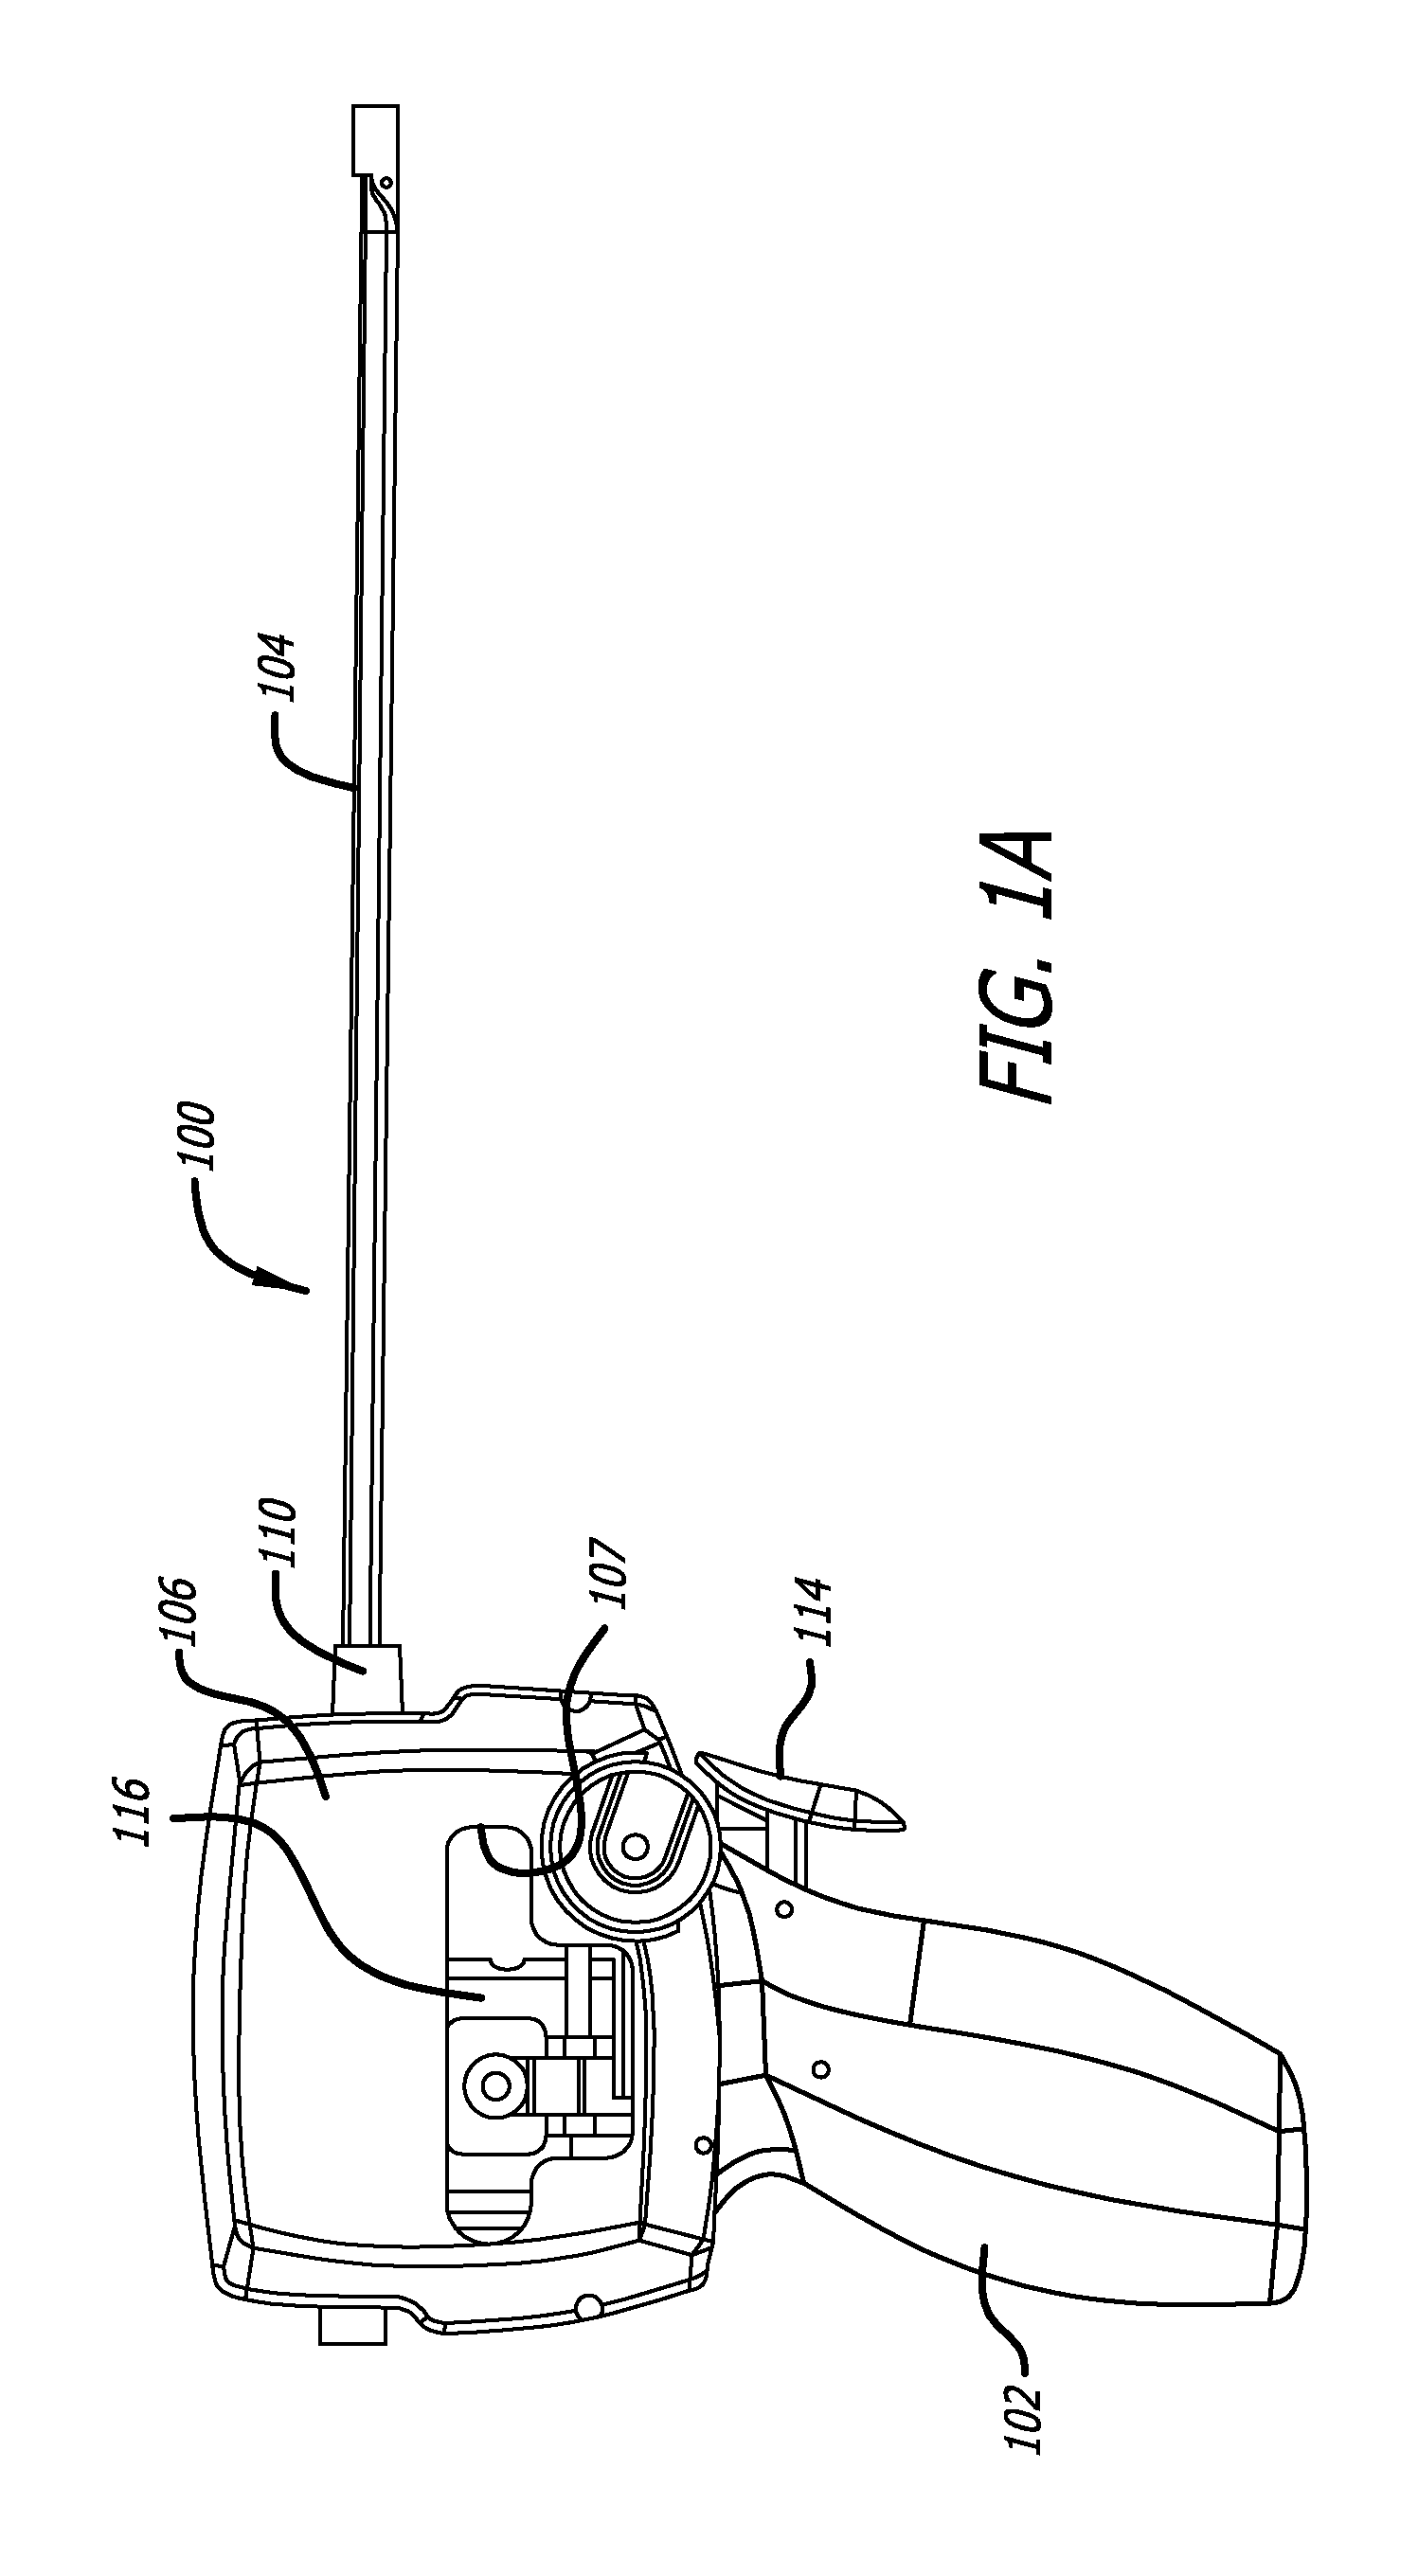 Multi-actuating trigger anchor delivery system